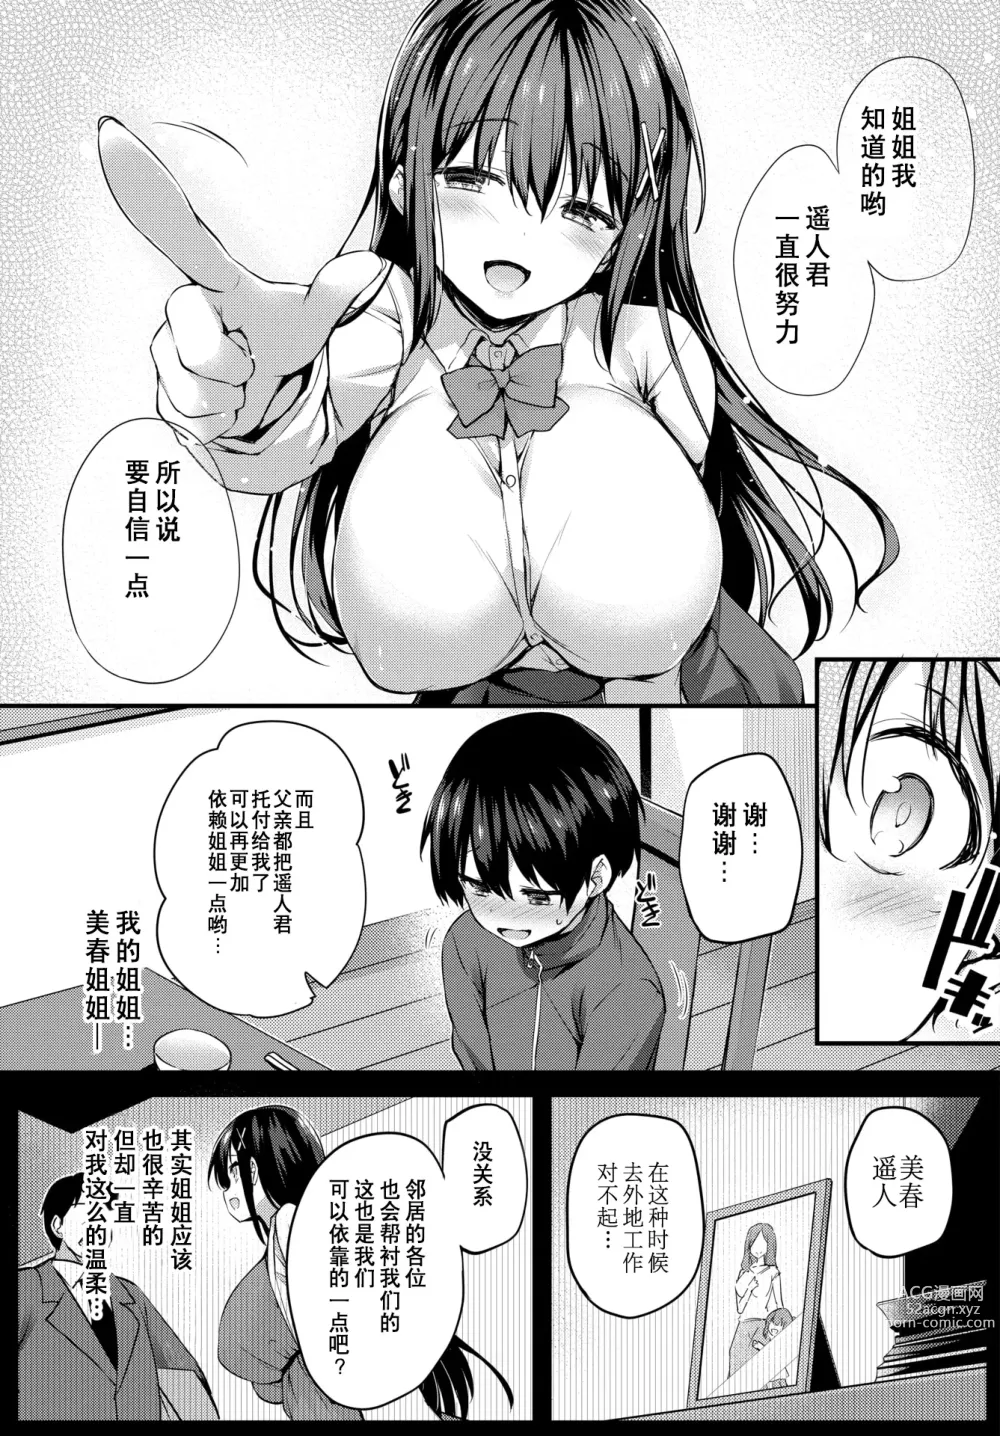 Page 4 of manga Boku no Onee-chan - My beloved was defiled and taken from me...